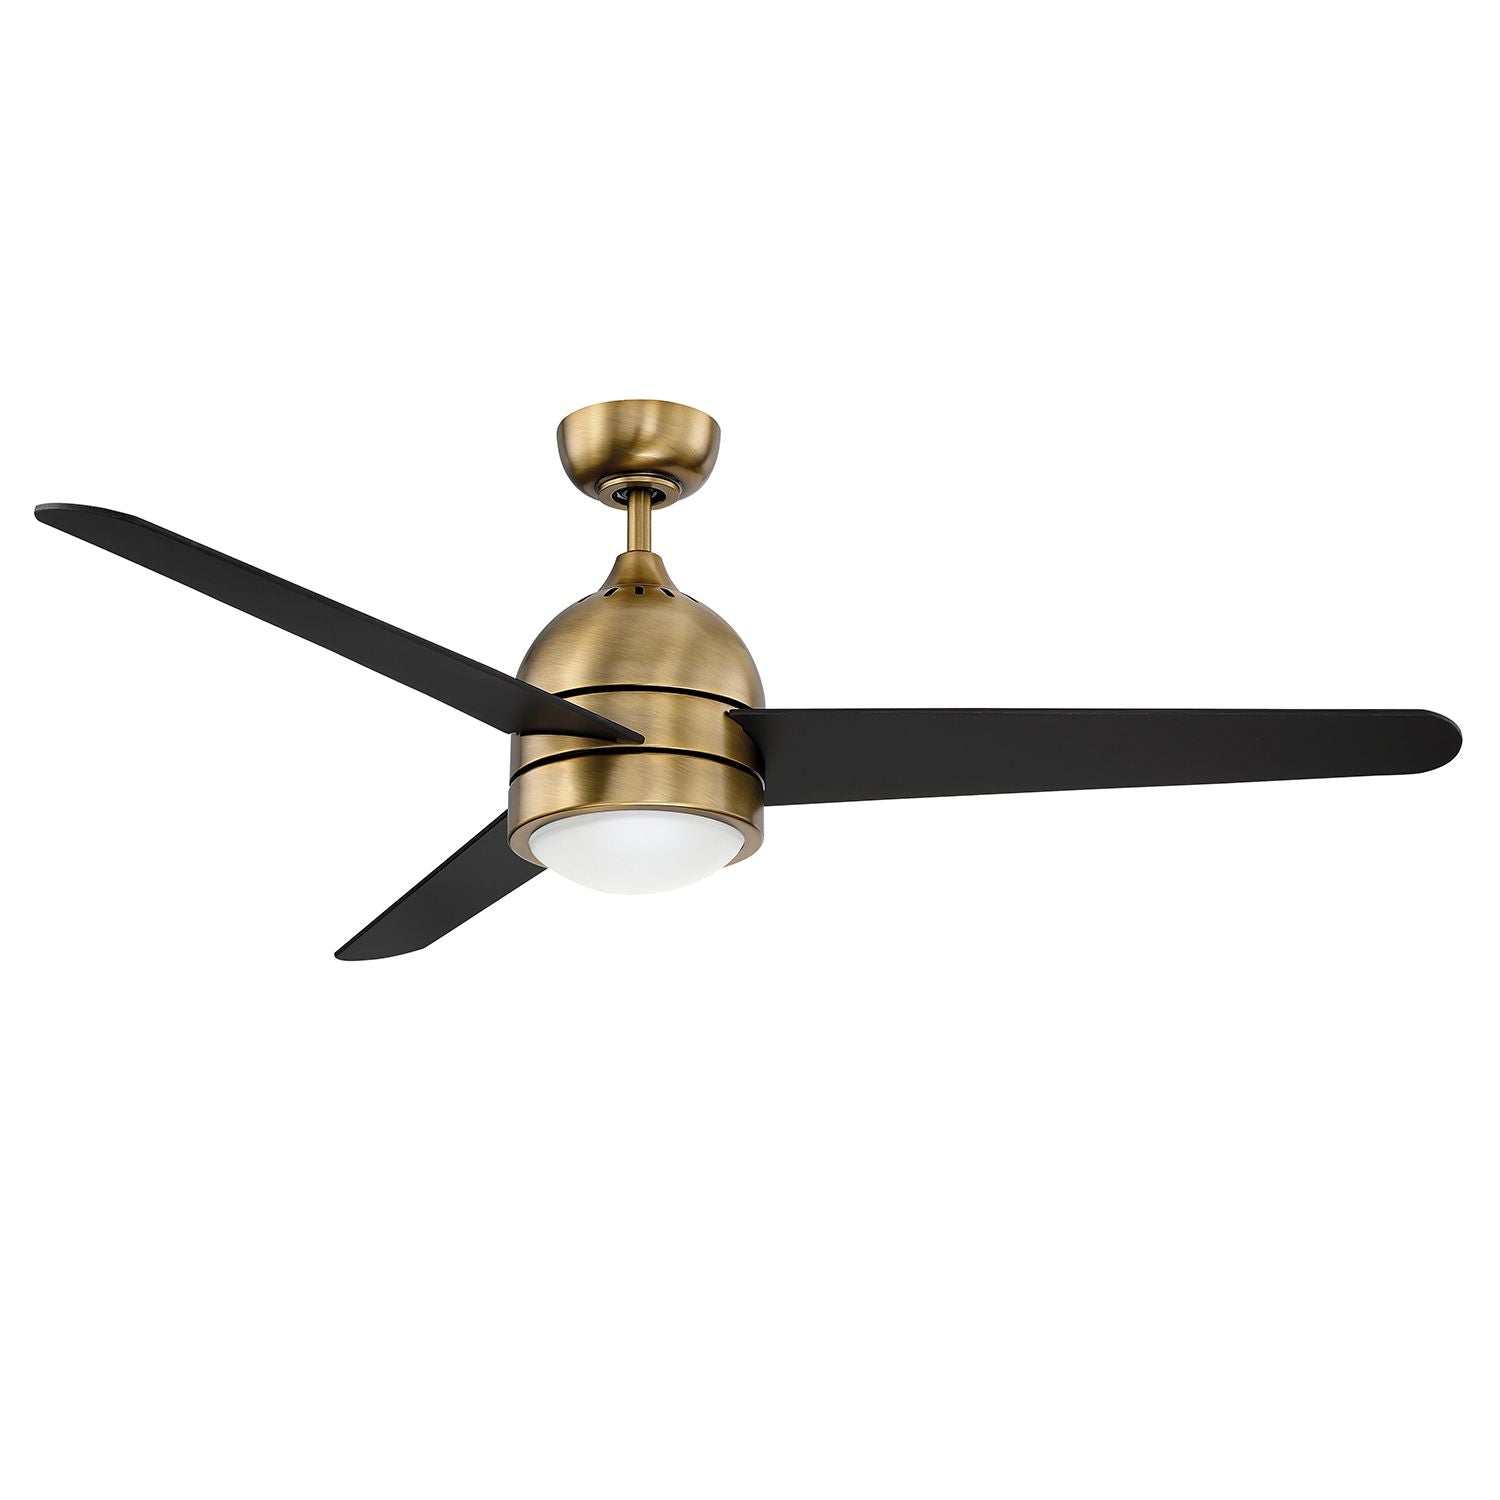 Zig Ceiling Fan New Aged Brass with Black blades